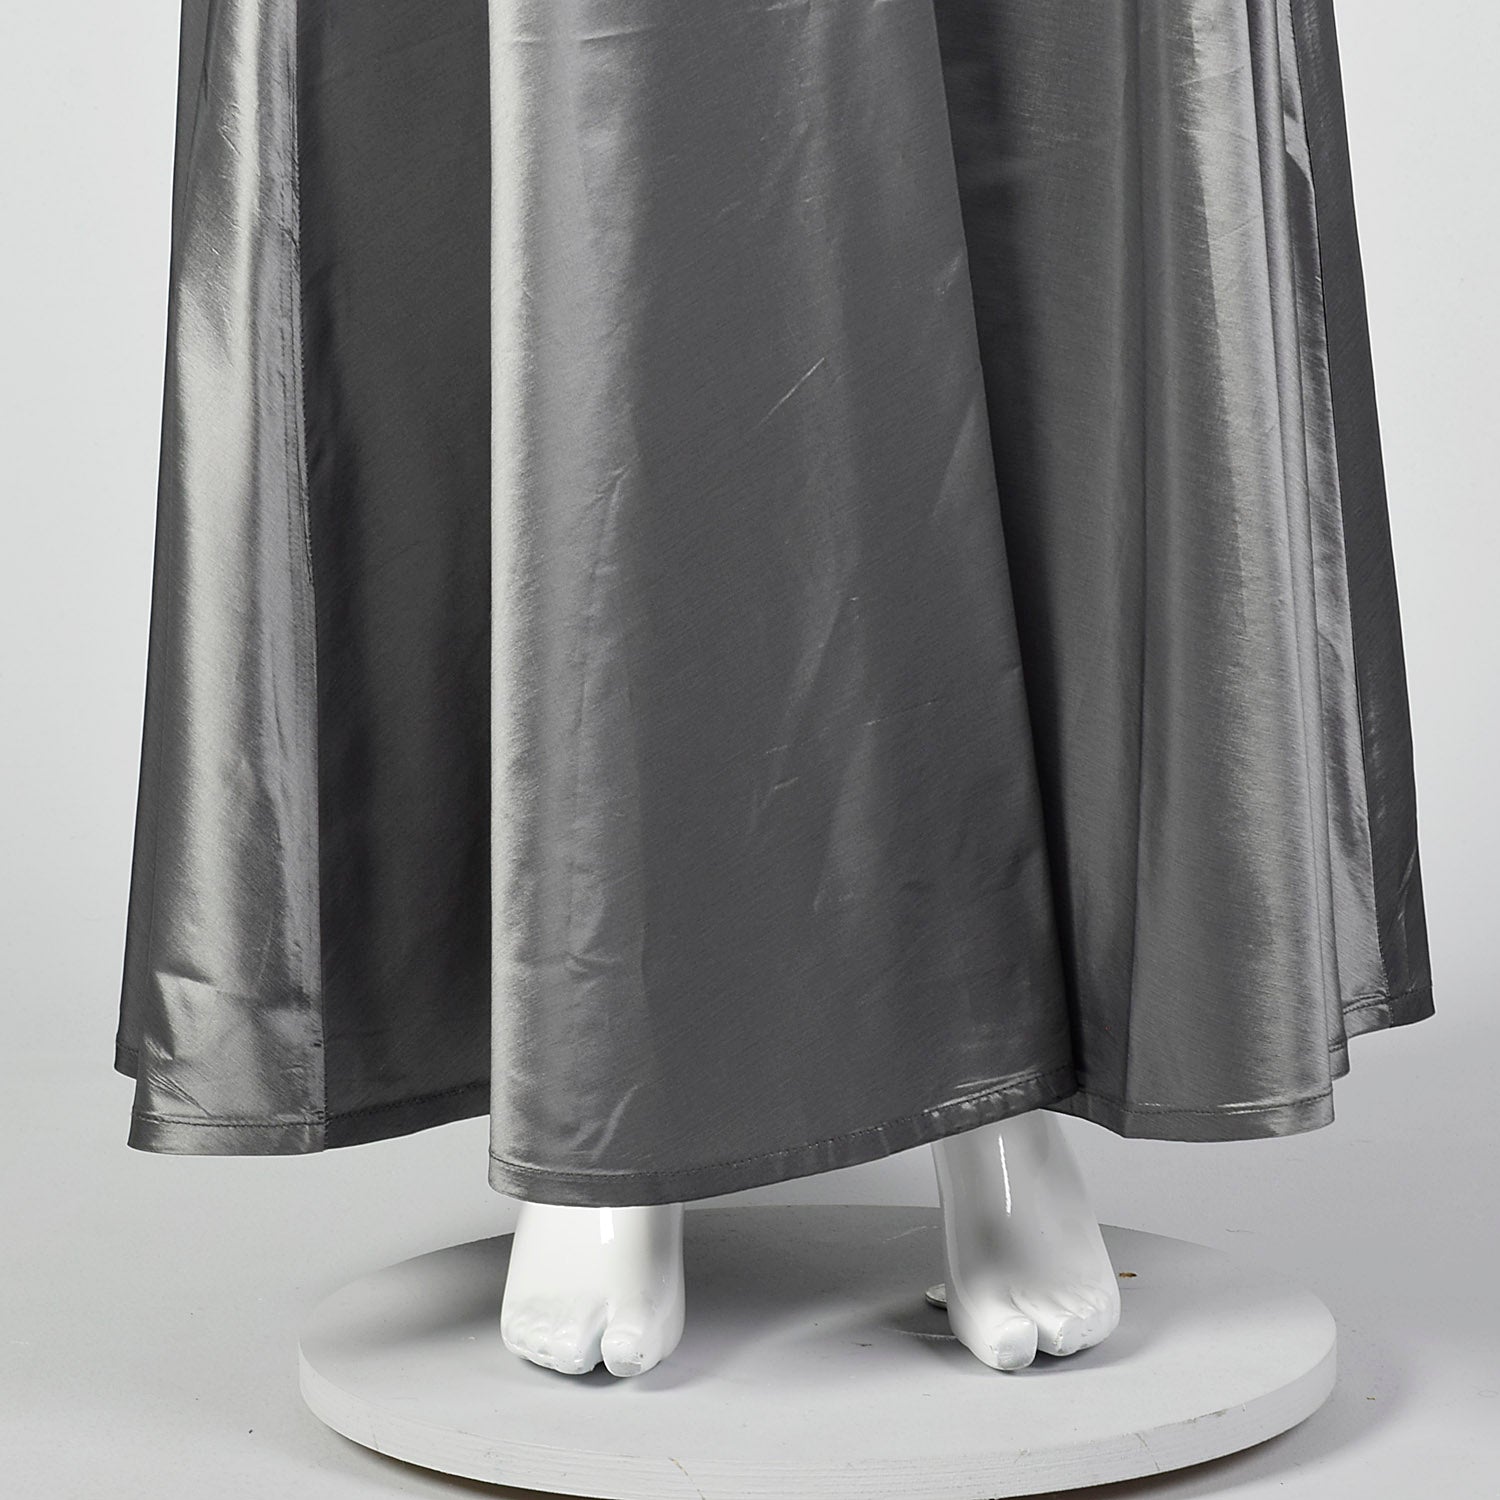 1990s Lord & Taylor Silver Maxi Skirt with Sash